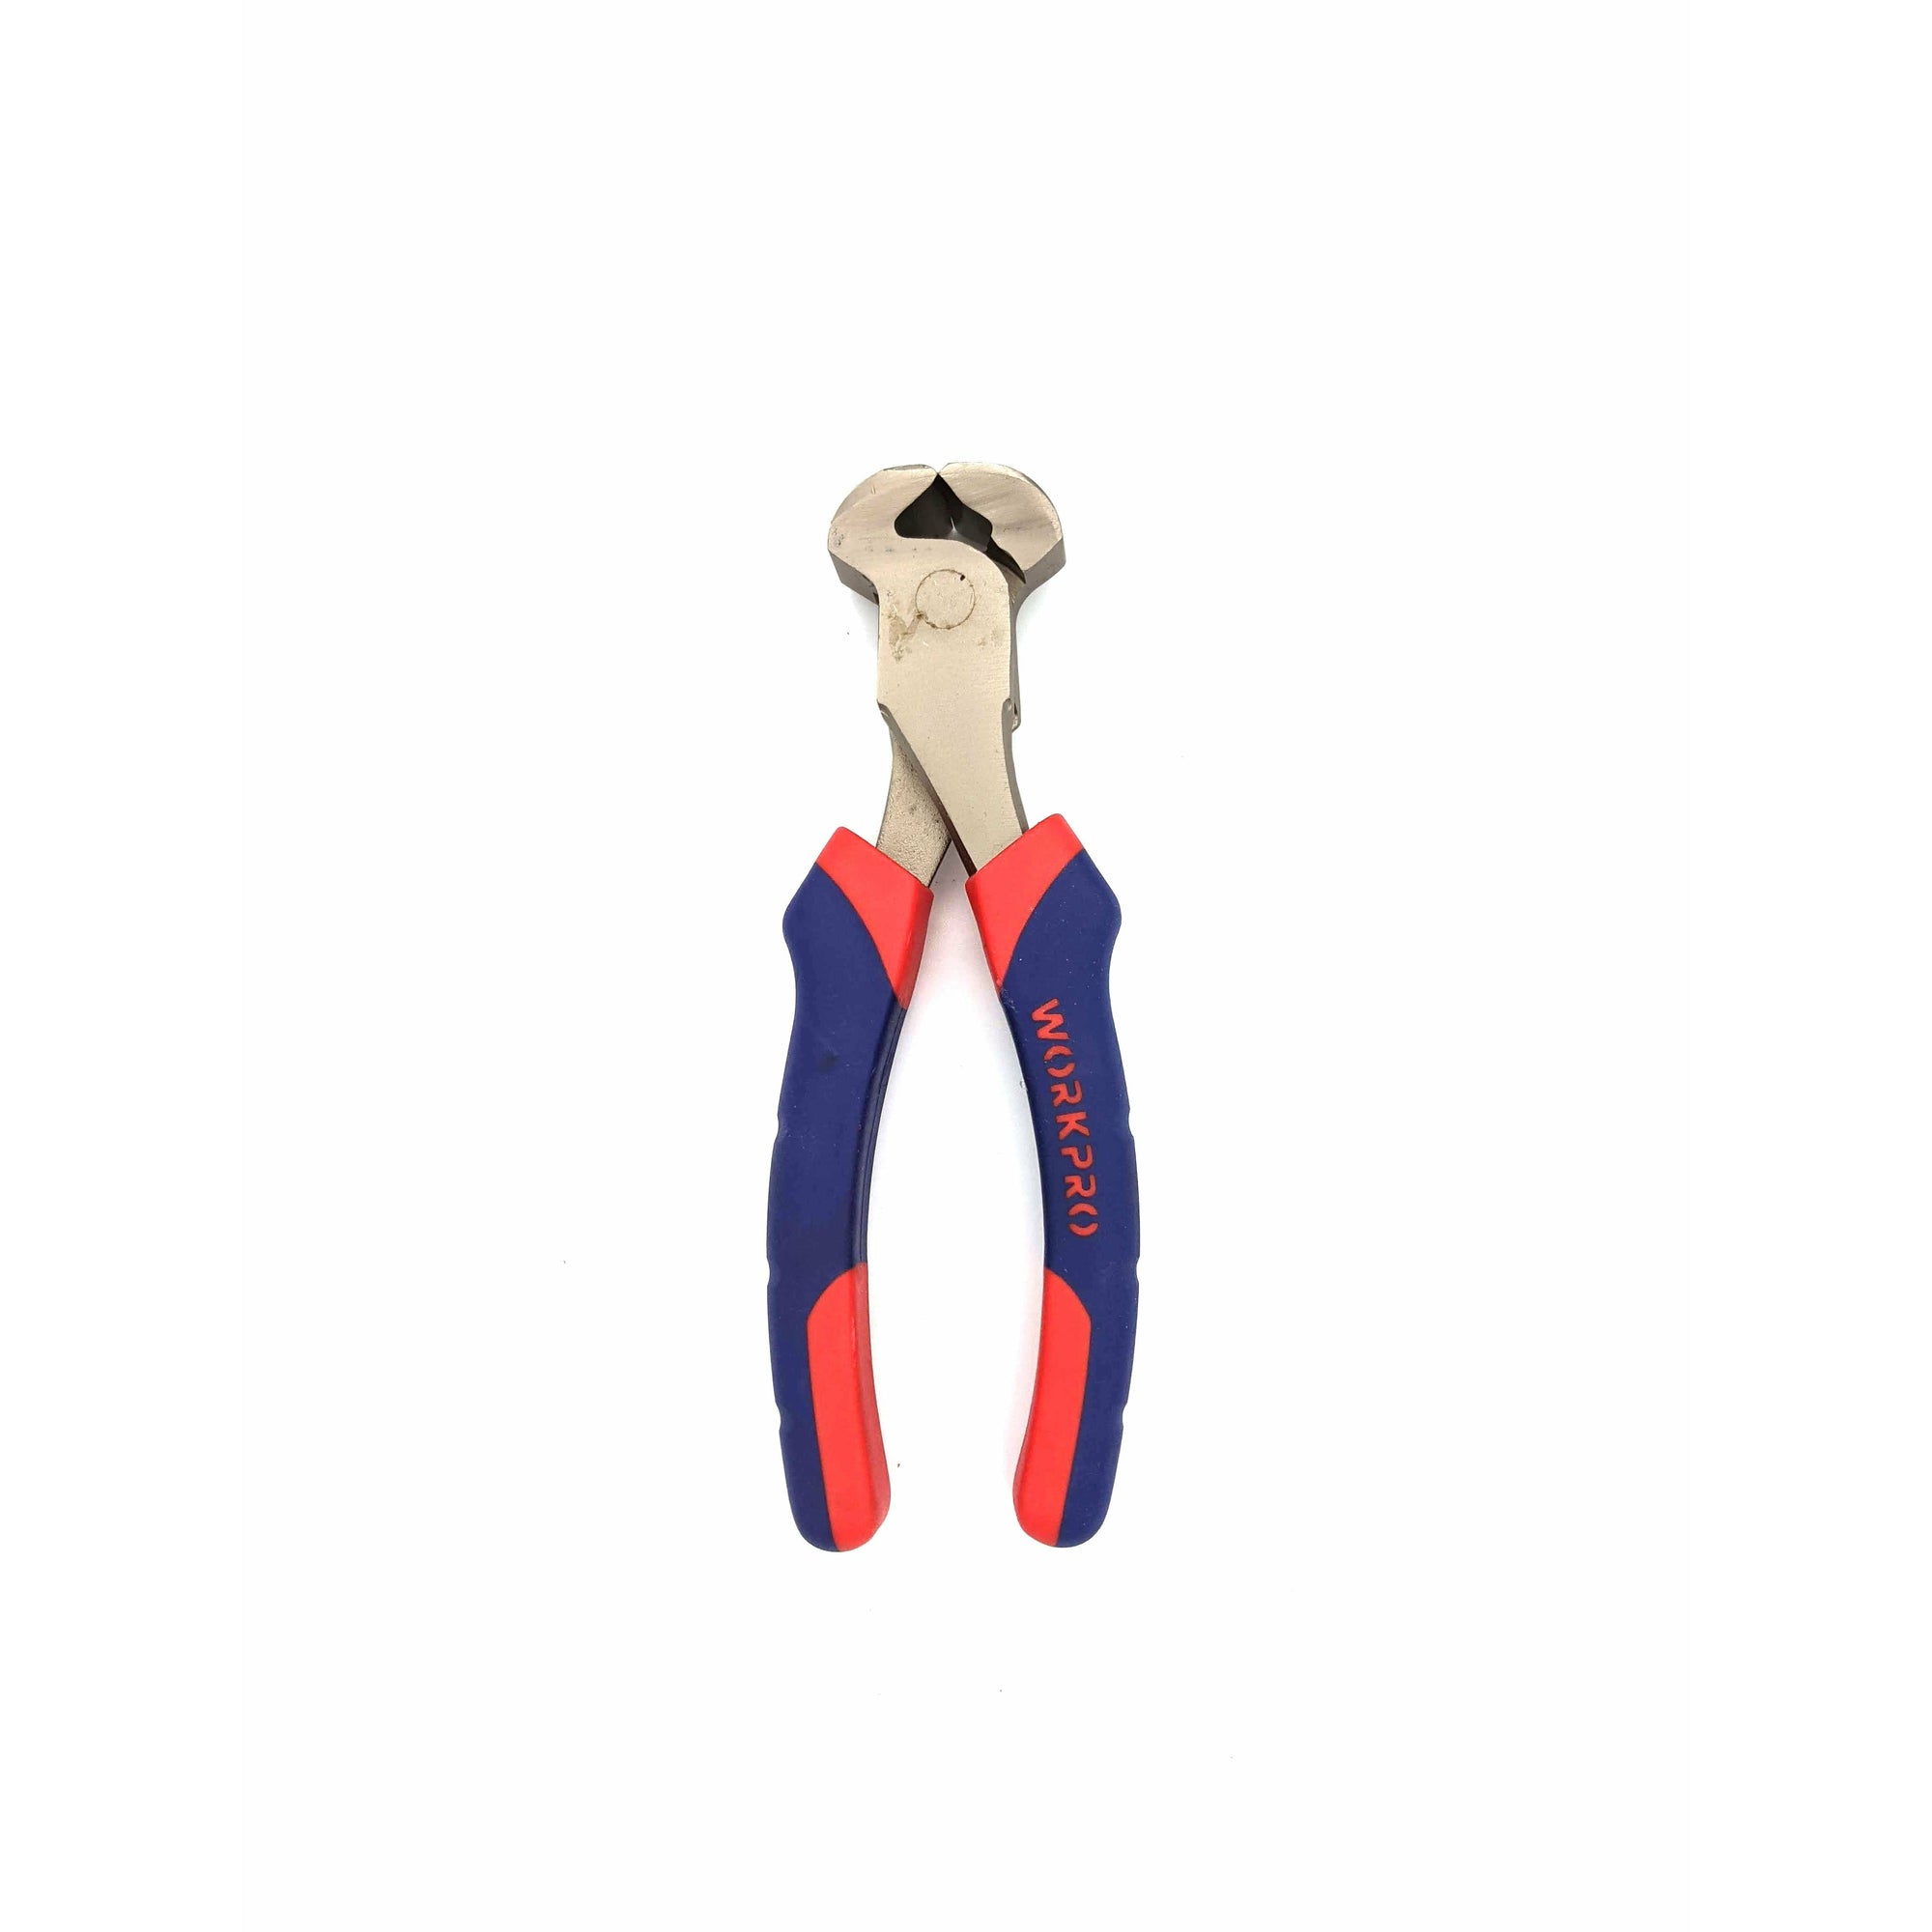 Workpro End Cutting Pliers 160Mm(6Inch)